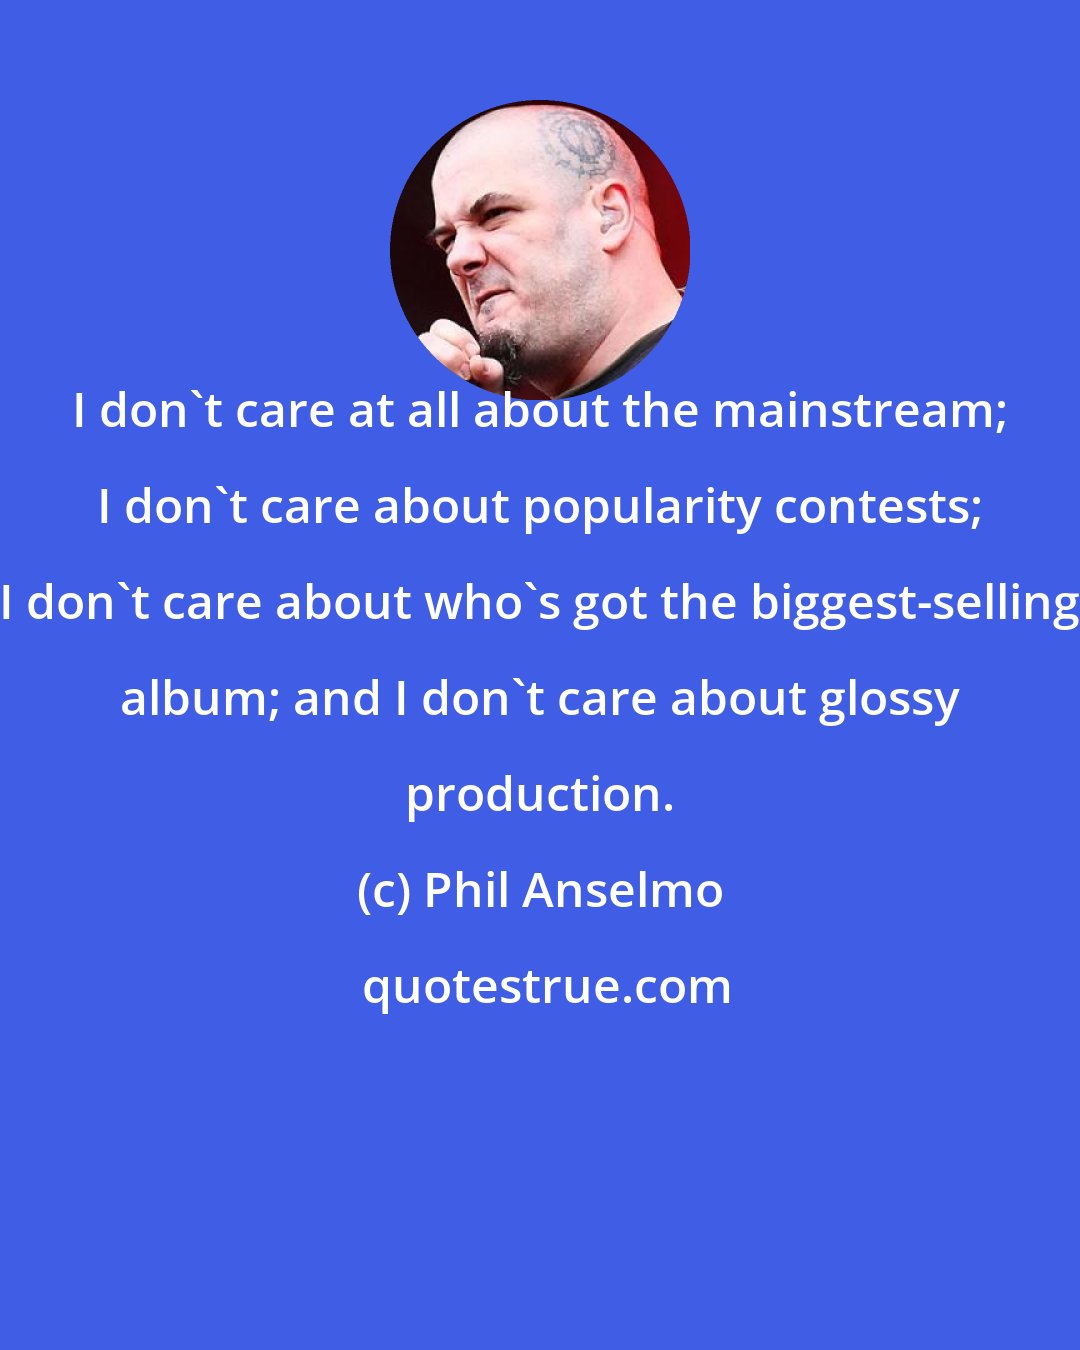 Phil Anselmo: I don't care at all about the mainstream; I don't care about popularity contests; I don't care about who's got the biggest-selling album; and I don't care about glossy production.